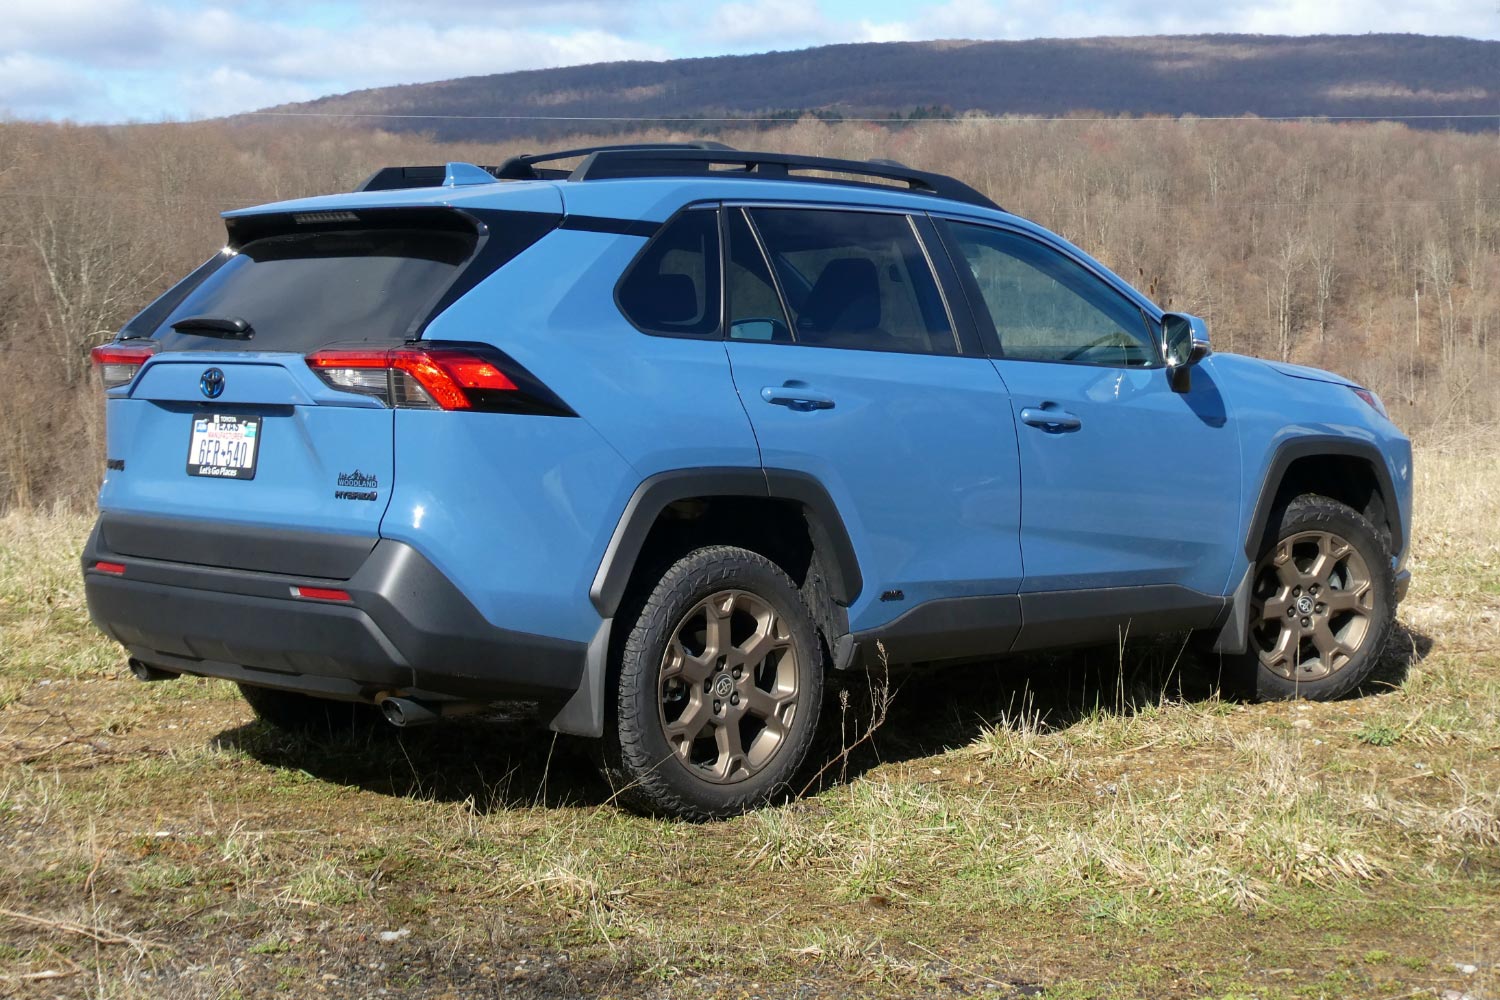 2023 Toyota RAV4 Hybrid Woodland Edition in Cavalry Blue rear angle parked in grass